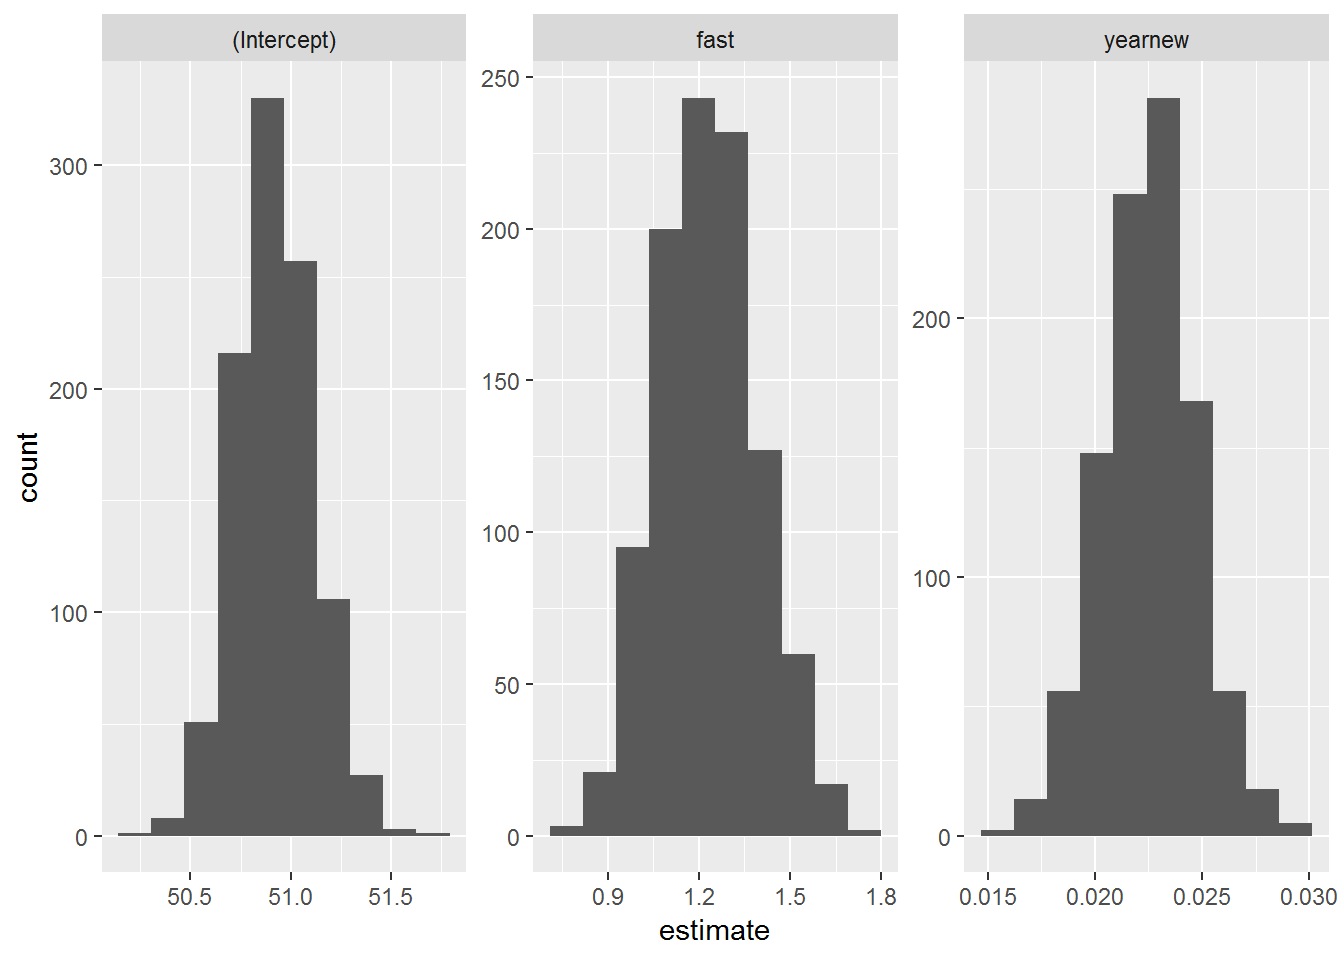 Bootstrapped distributions for Model 4 coefficients